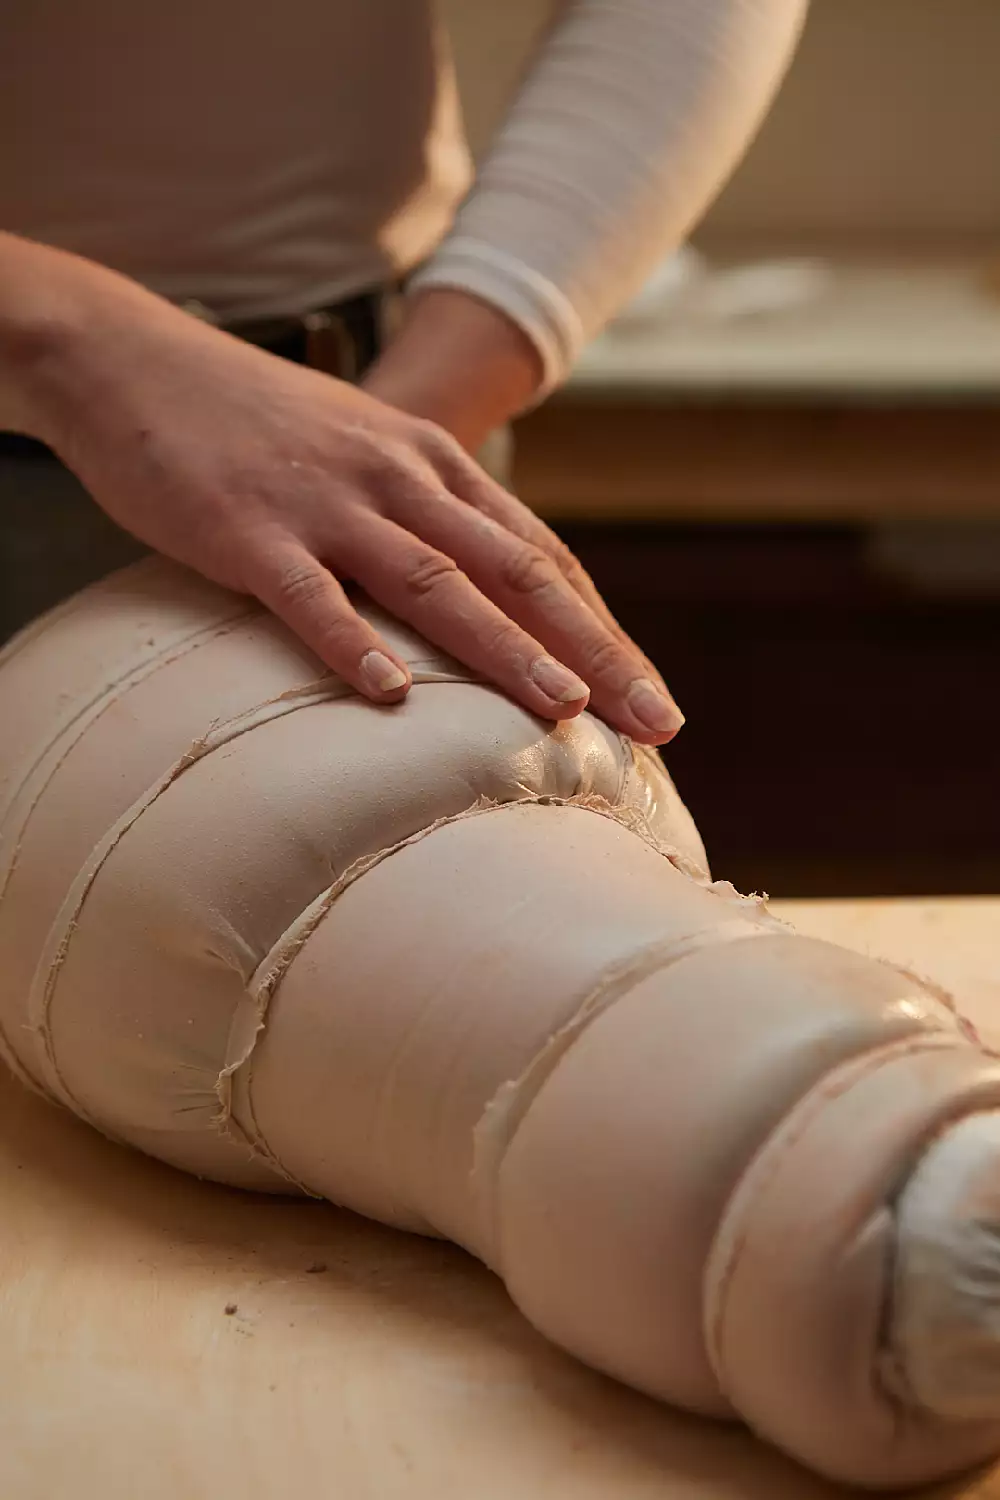 Image shows a close up of the artists hands working on a sculpture